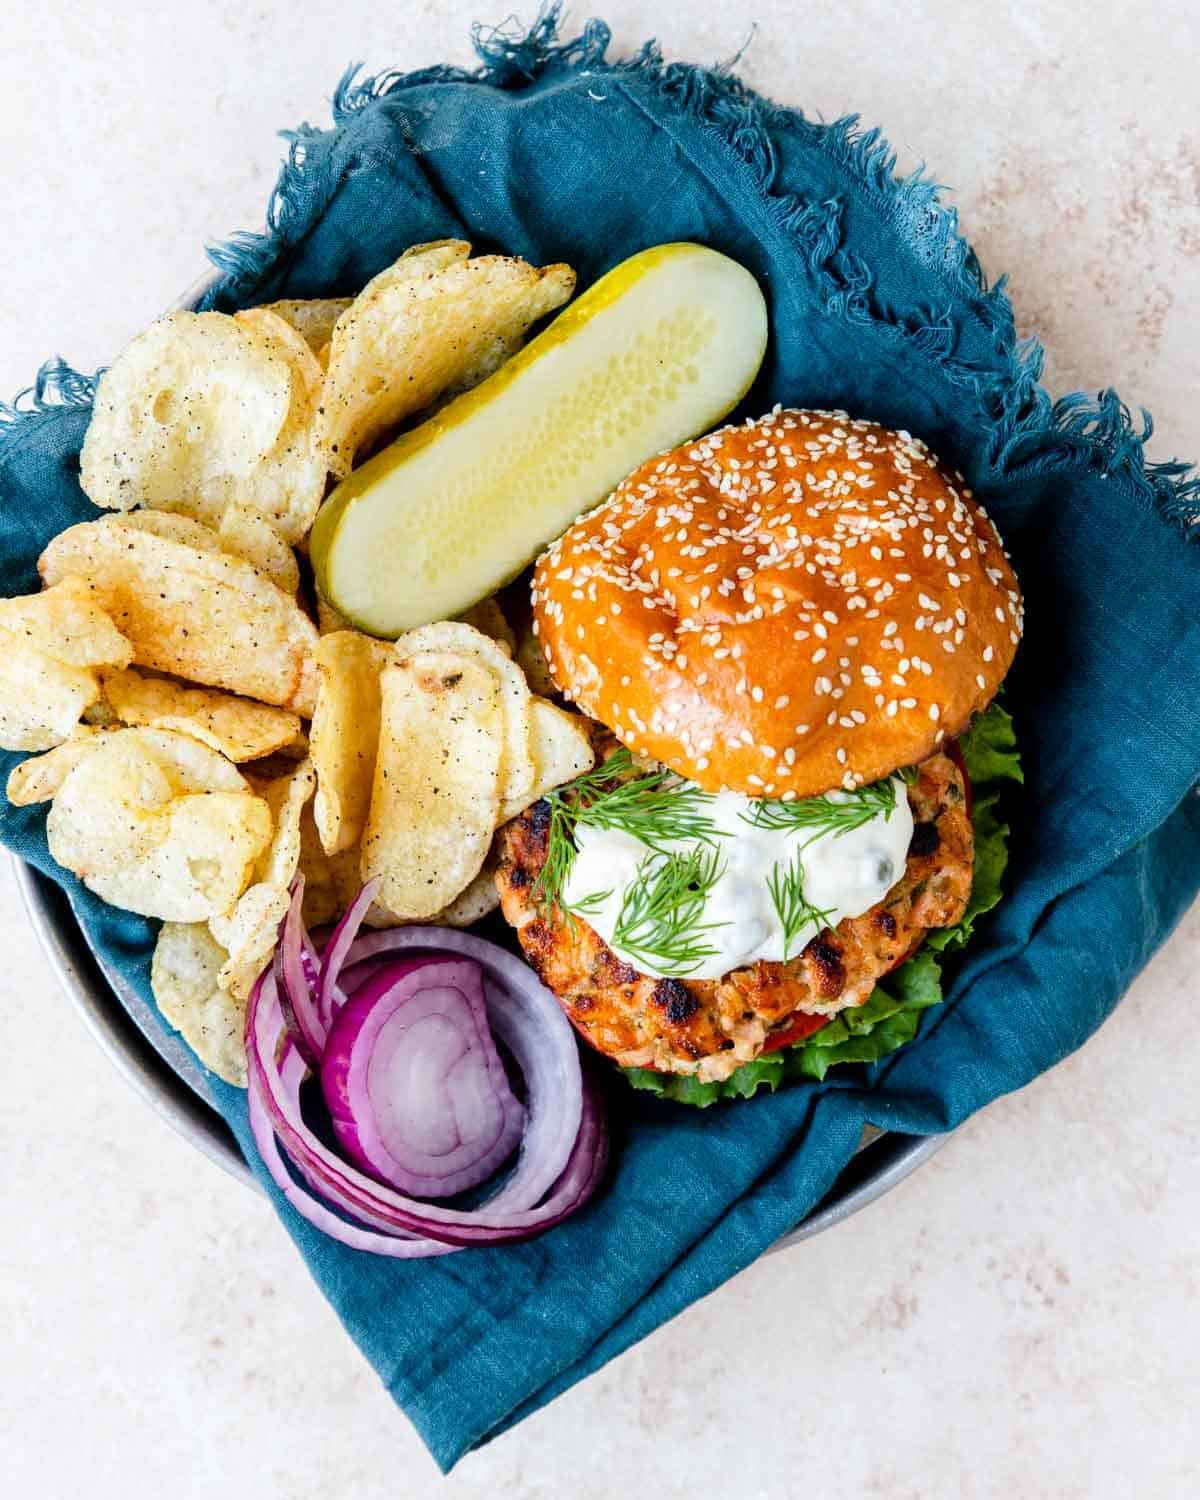 salmon burger with lemon caper mayo on the top with chips and a pickle to the side